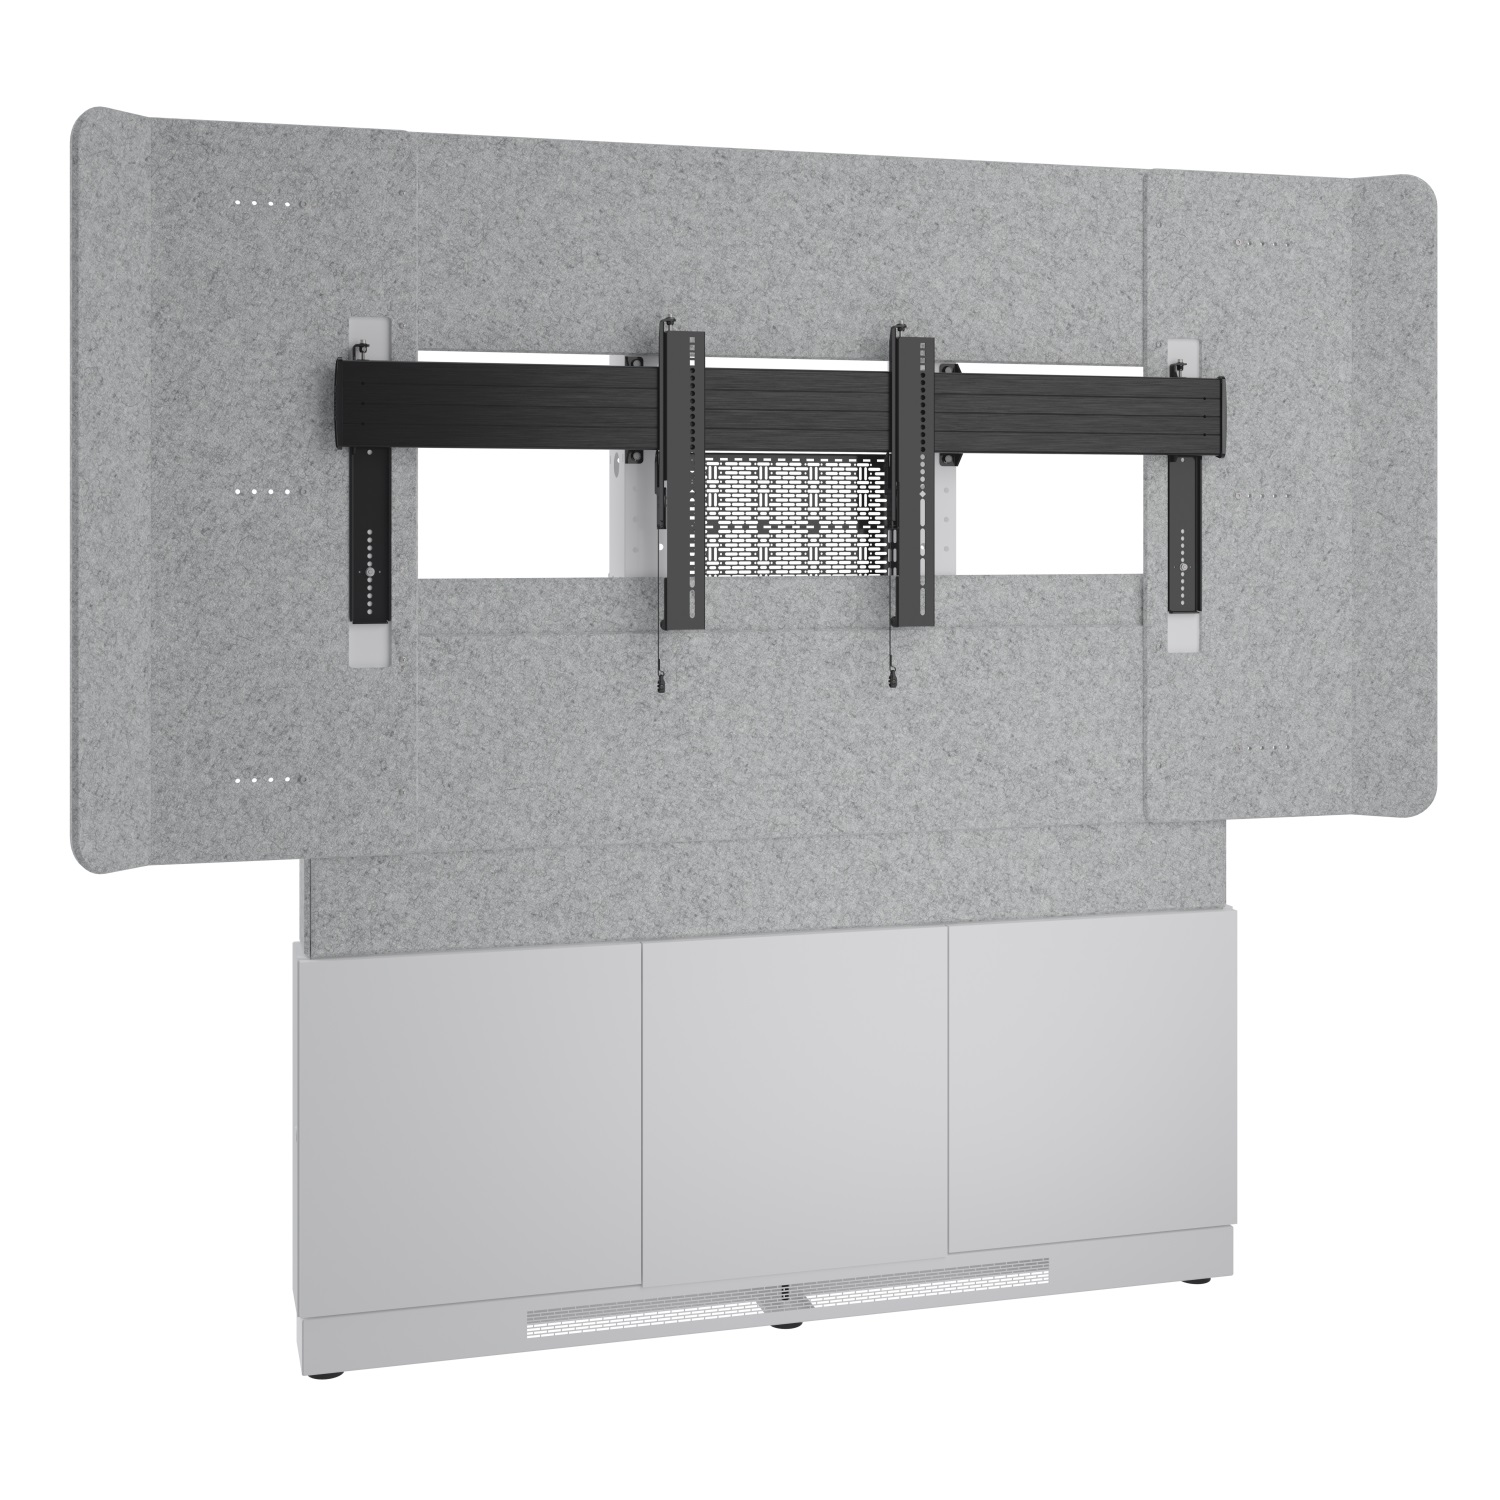 Forum 66 inch Display Stand